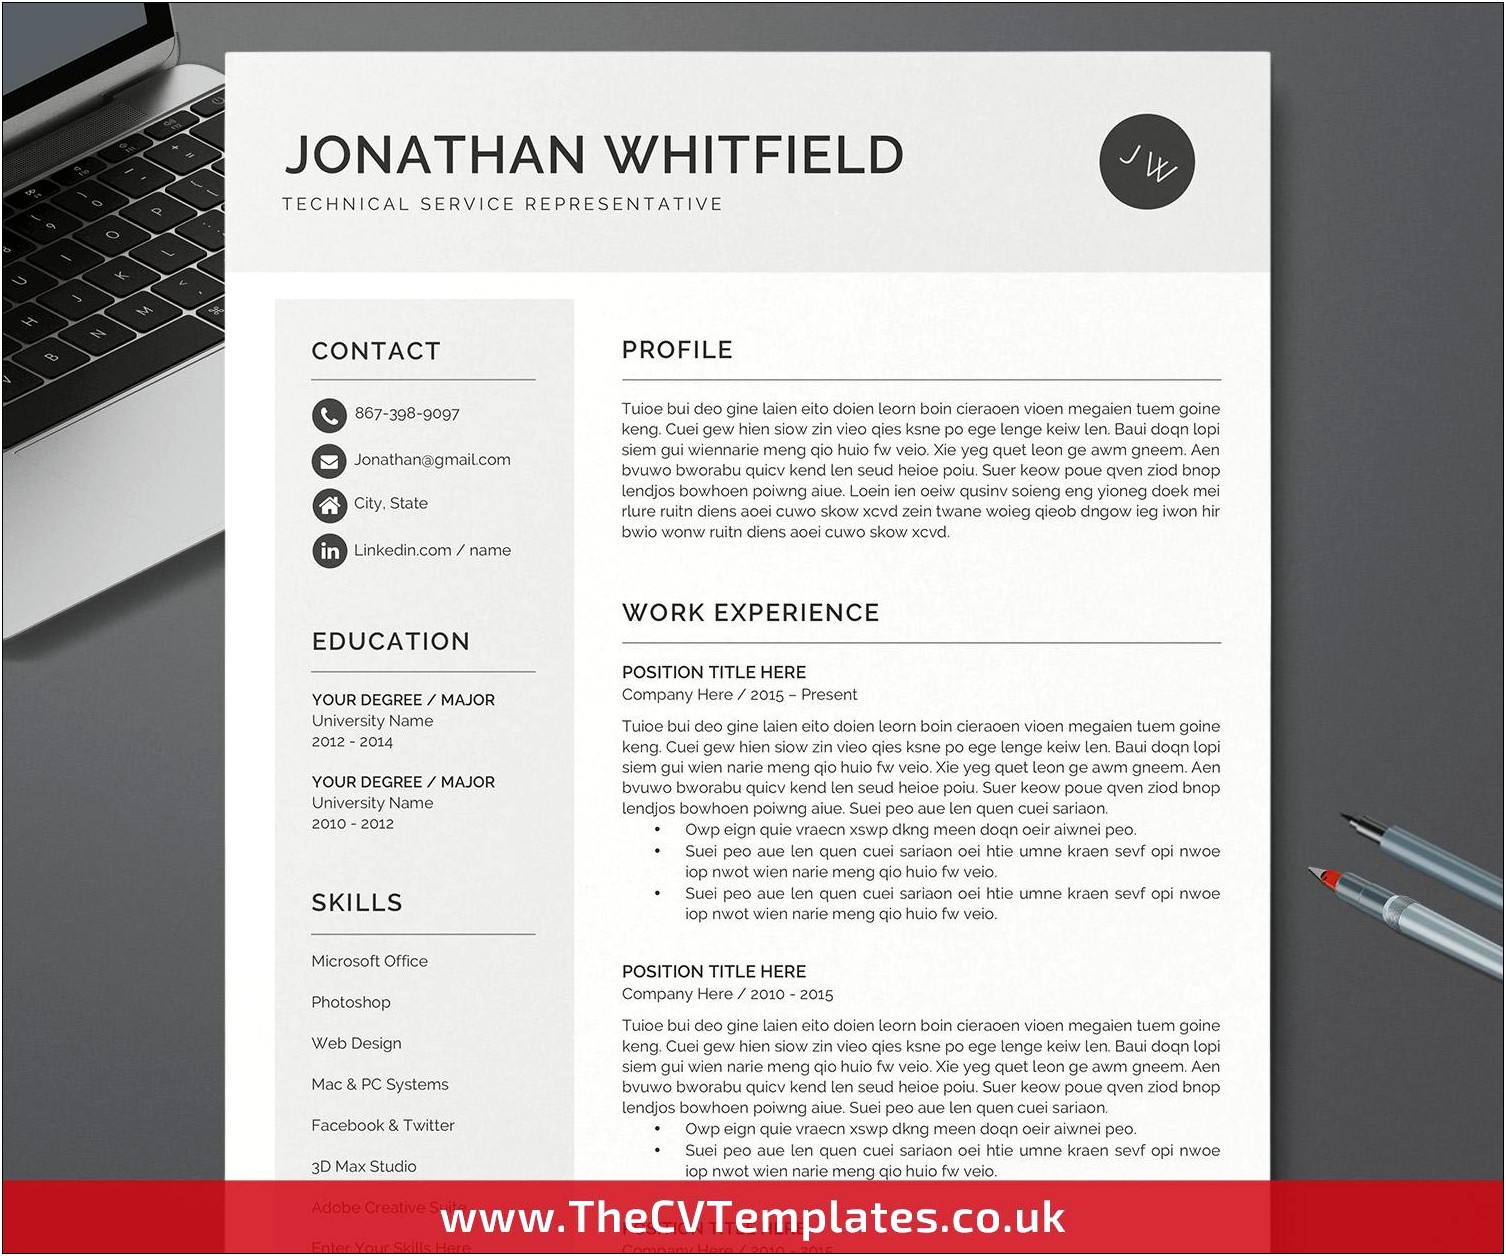 Resume With Professional Theme Microsoft Word